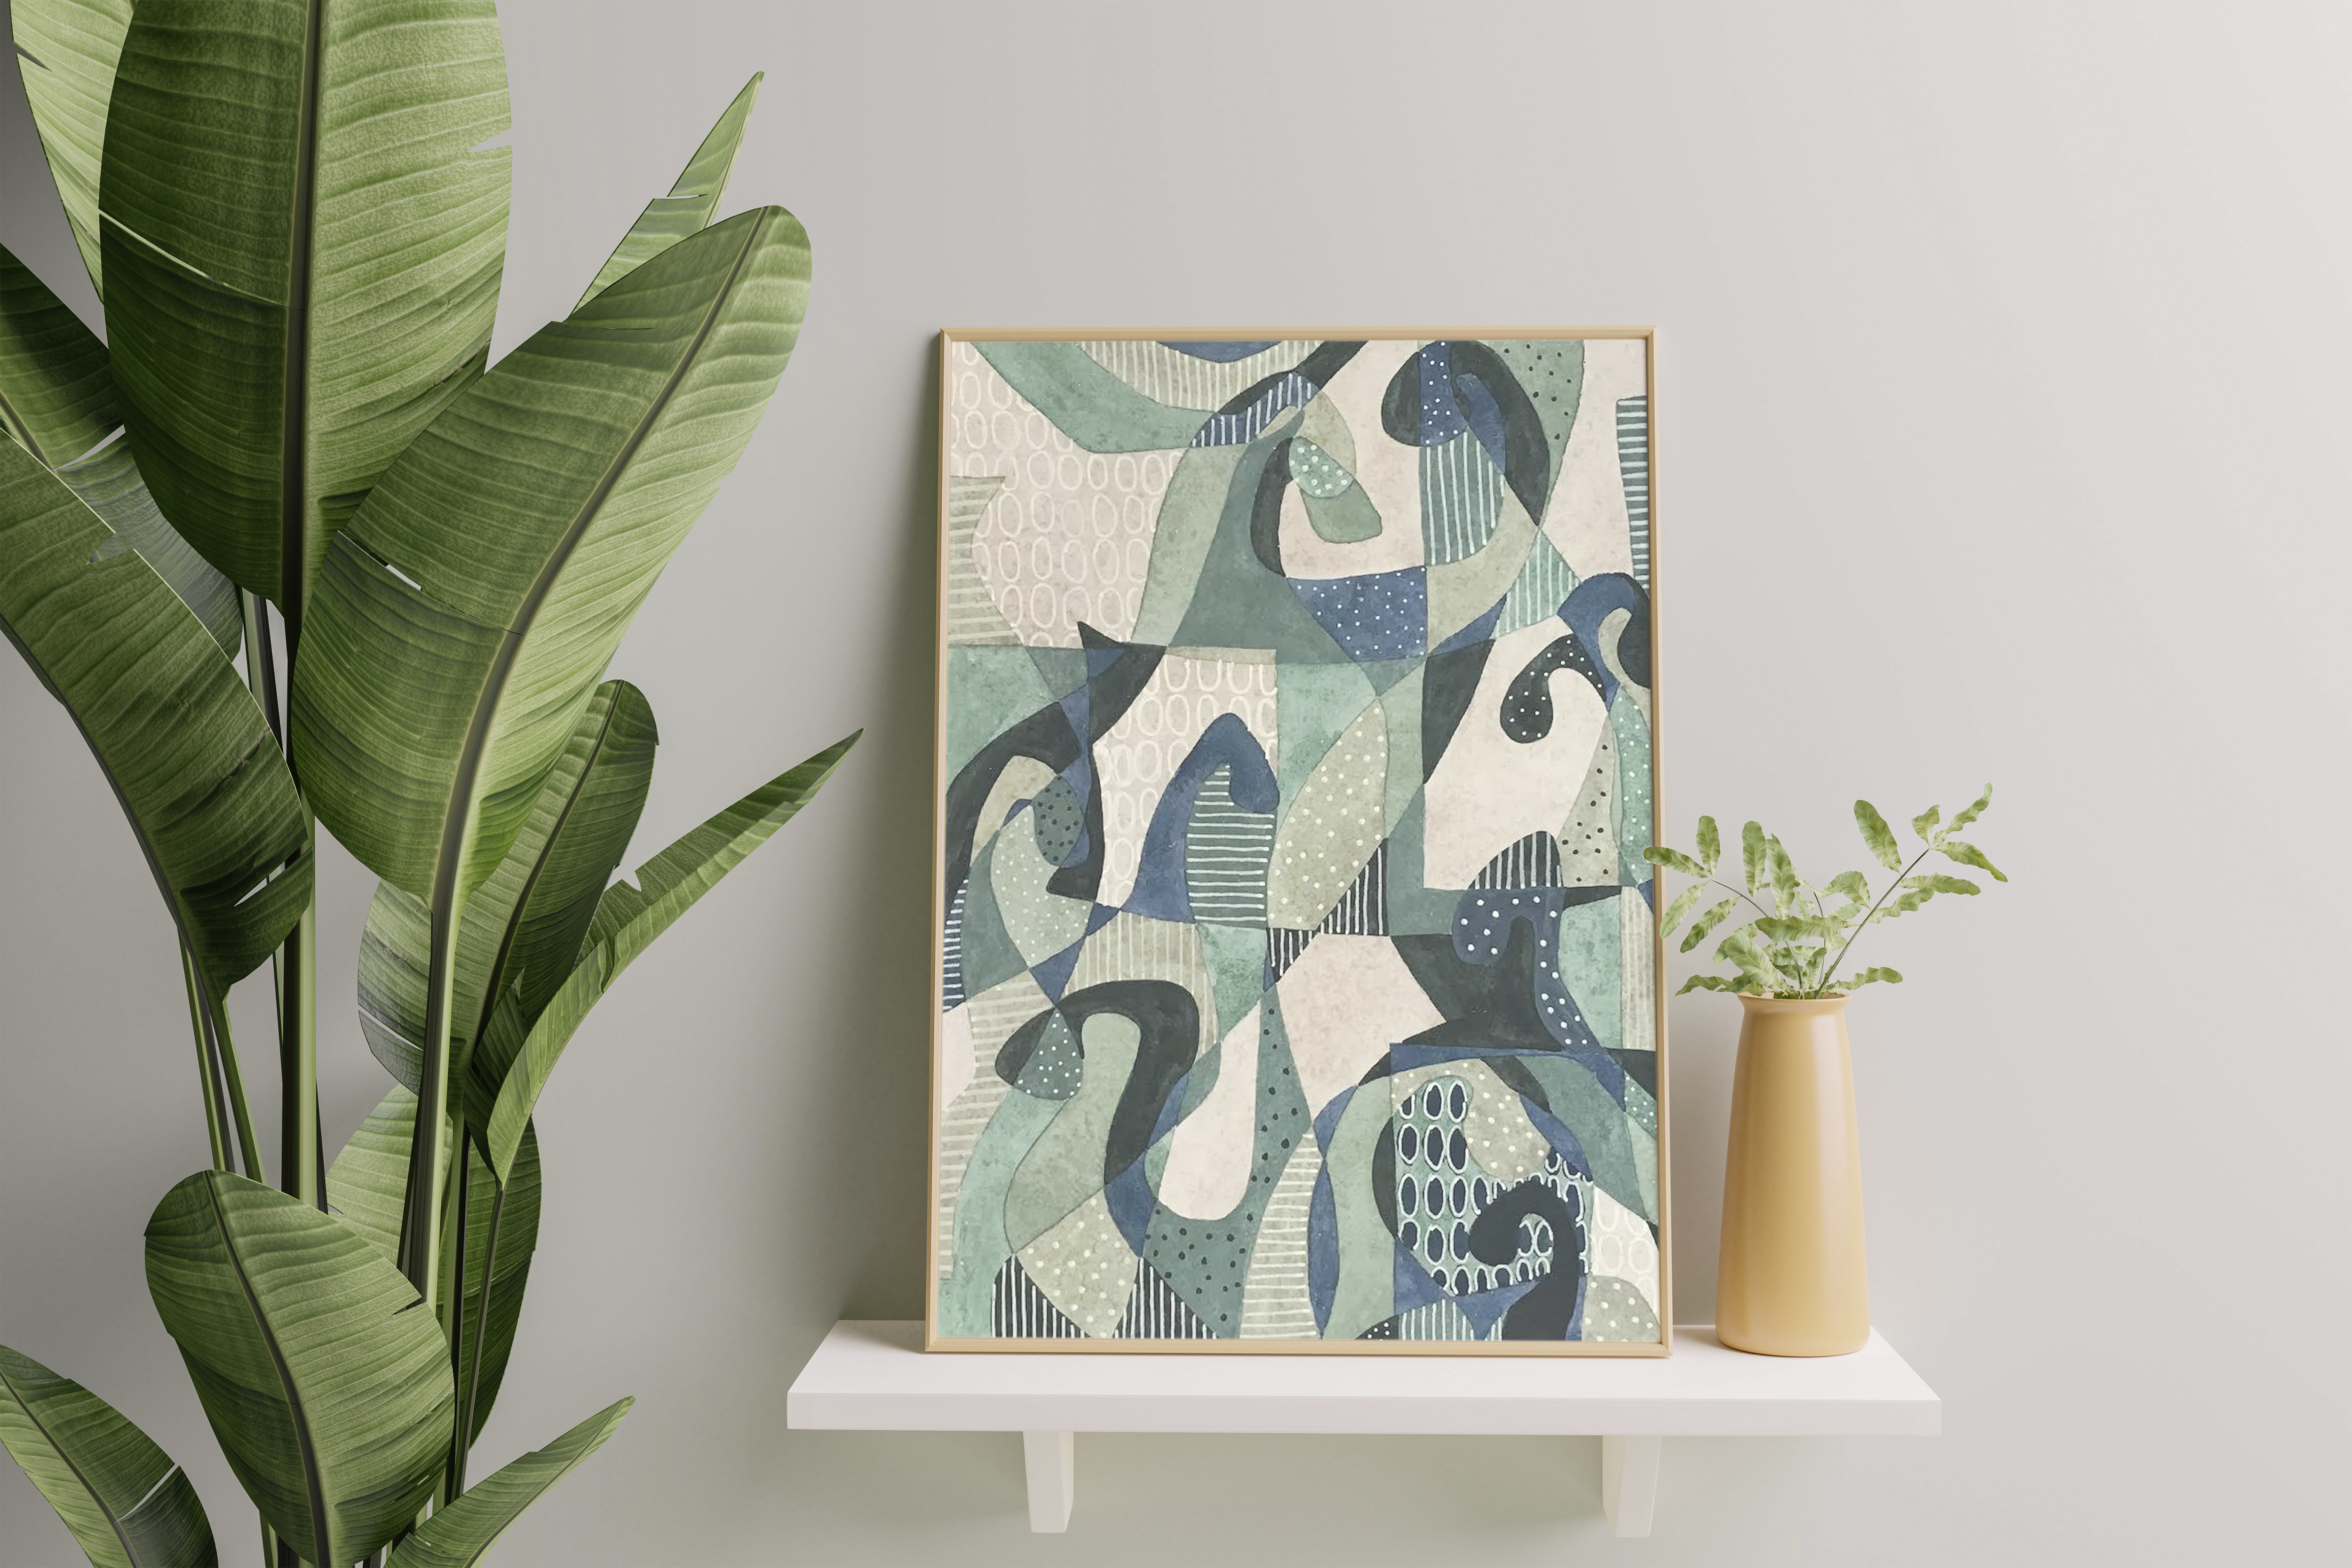 Green beige and blue abstract art with solid shapes 